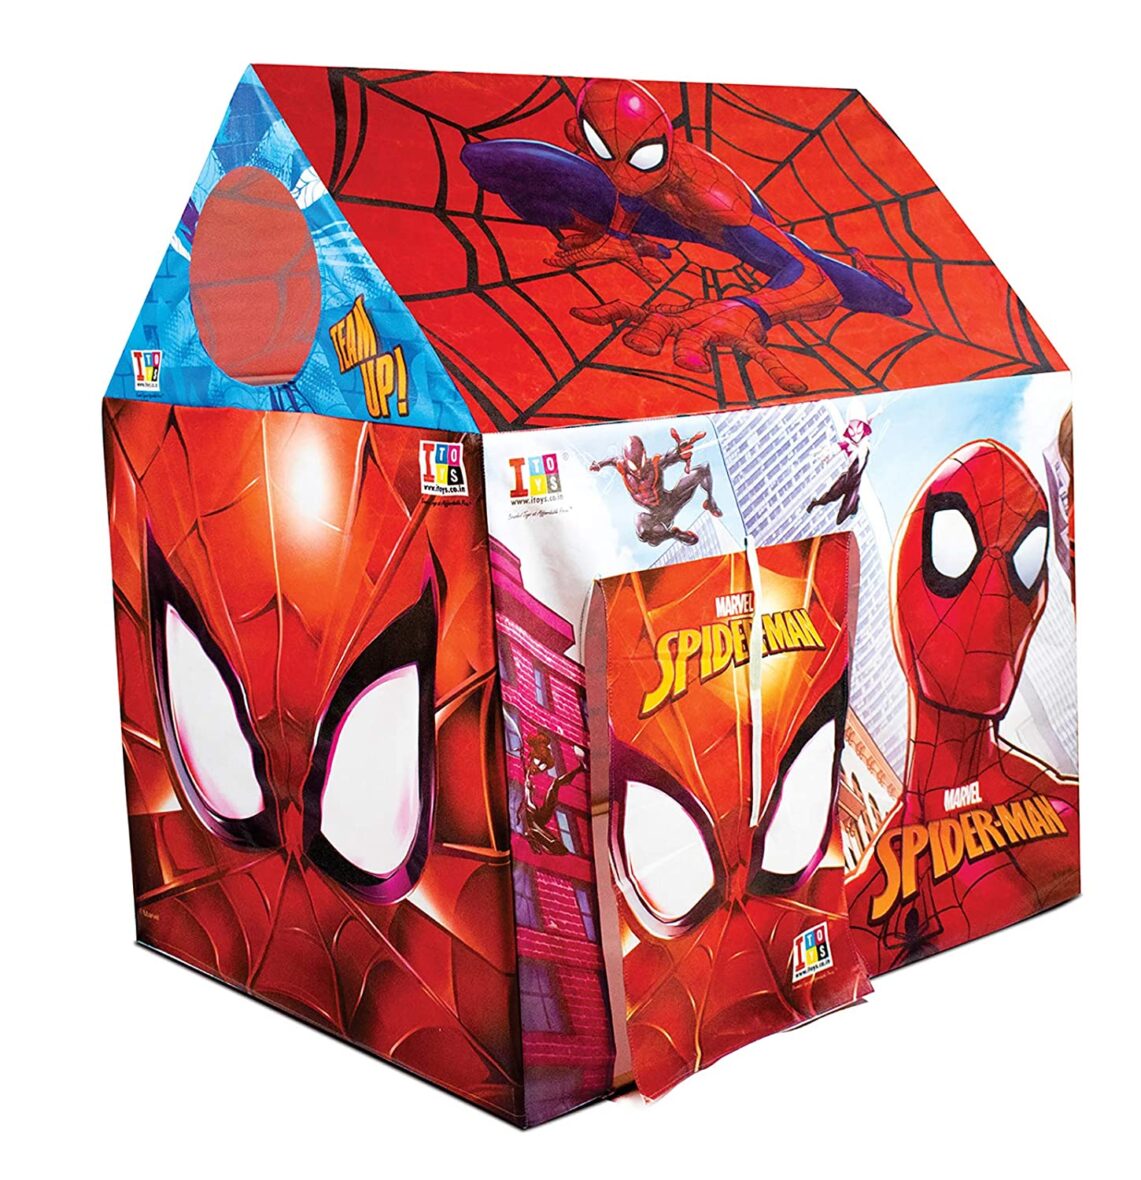 I Toys Jumbo Size Extremely Light Weight , Water Proof Kids Play Tent House for 10 Year Old Girls and Boys (Spiderman Tent)